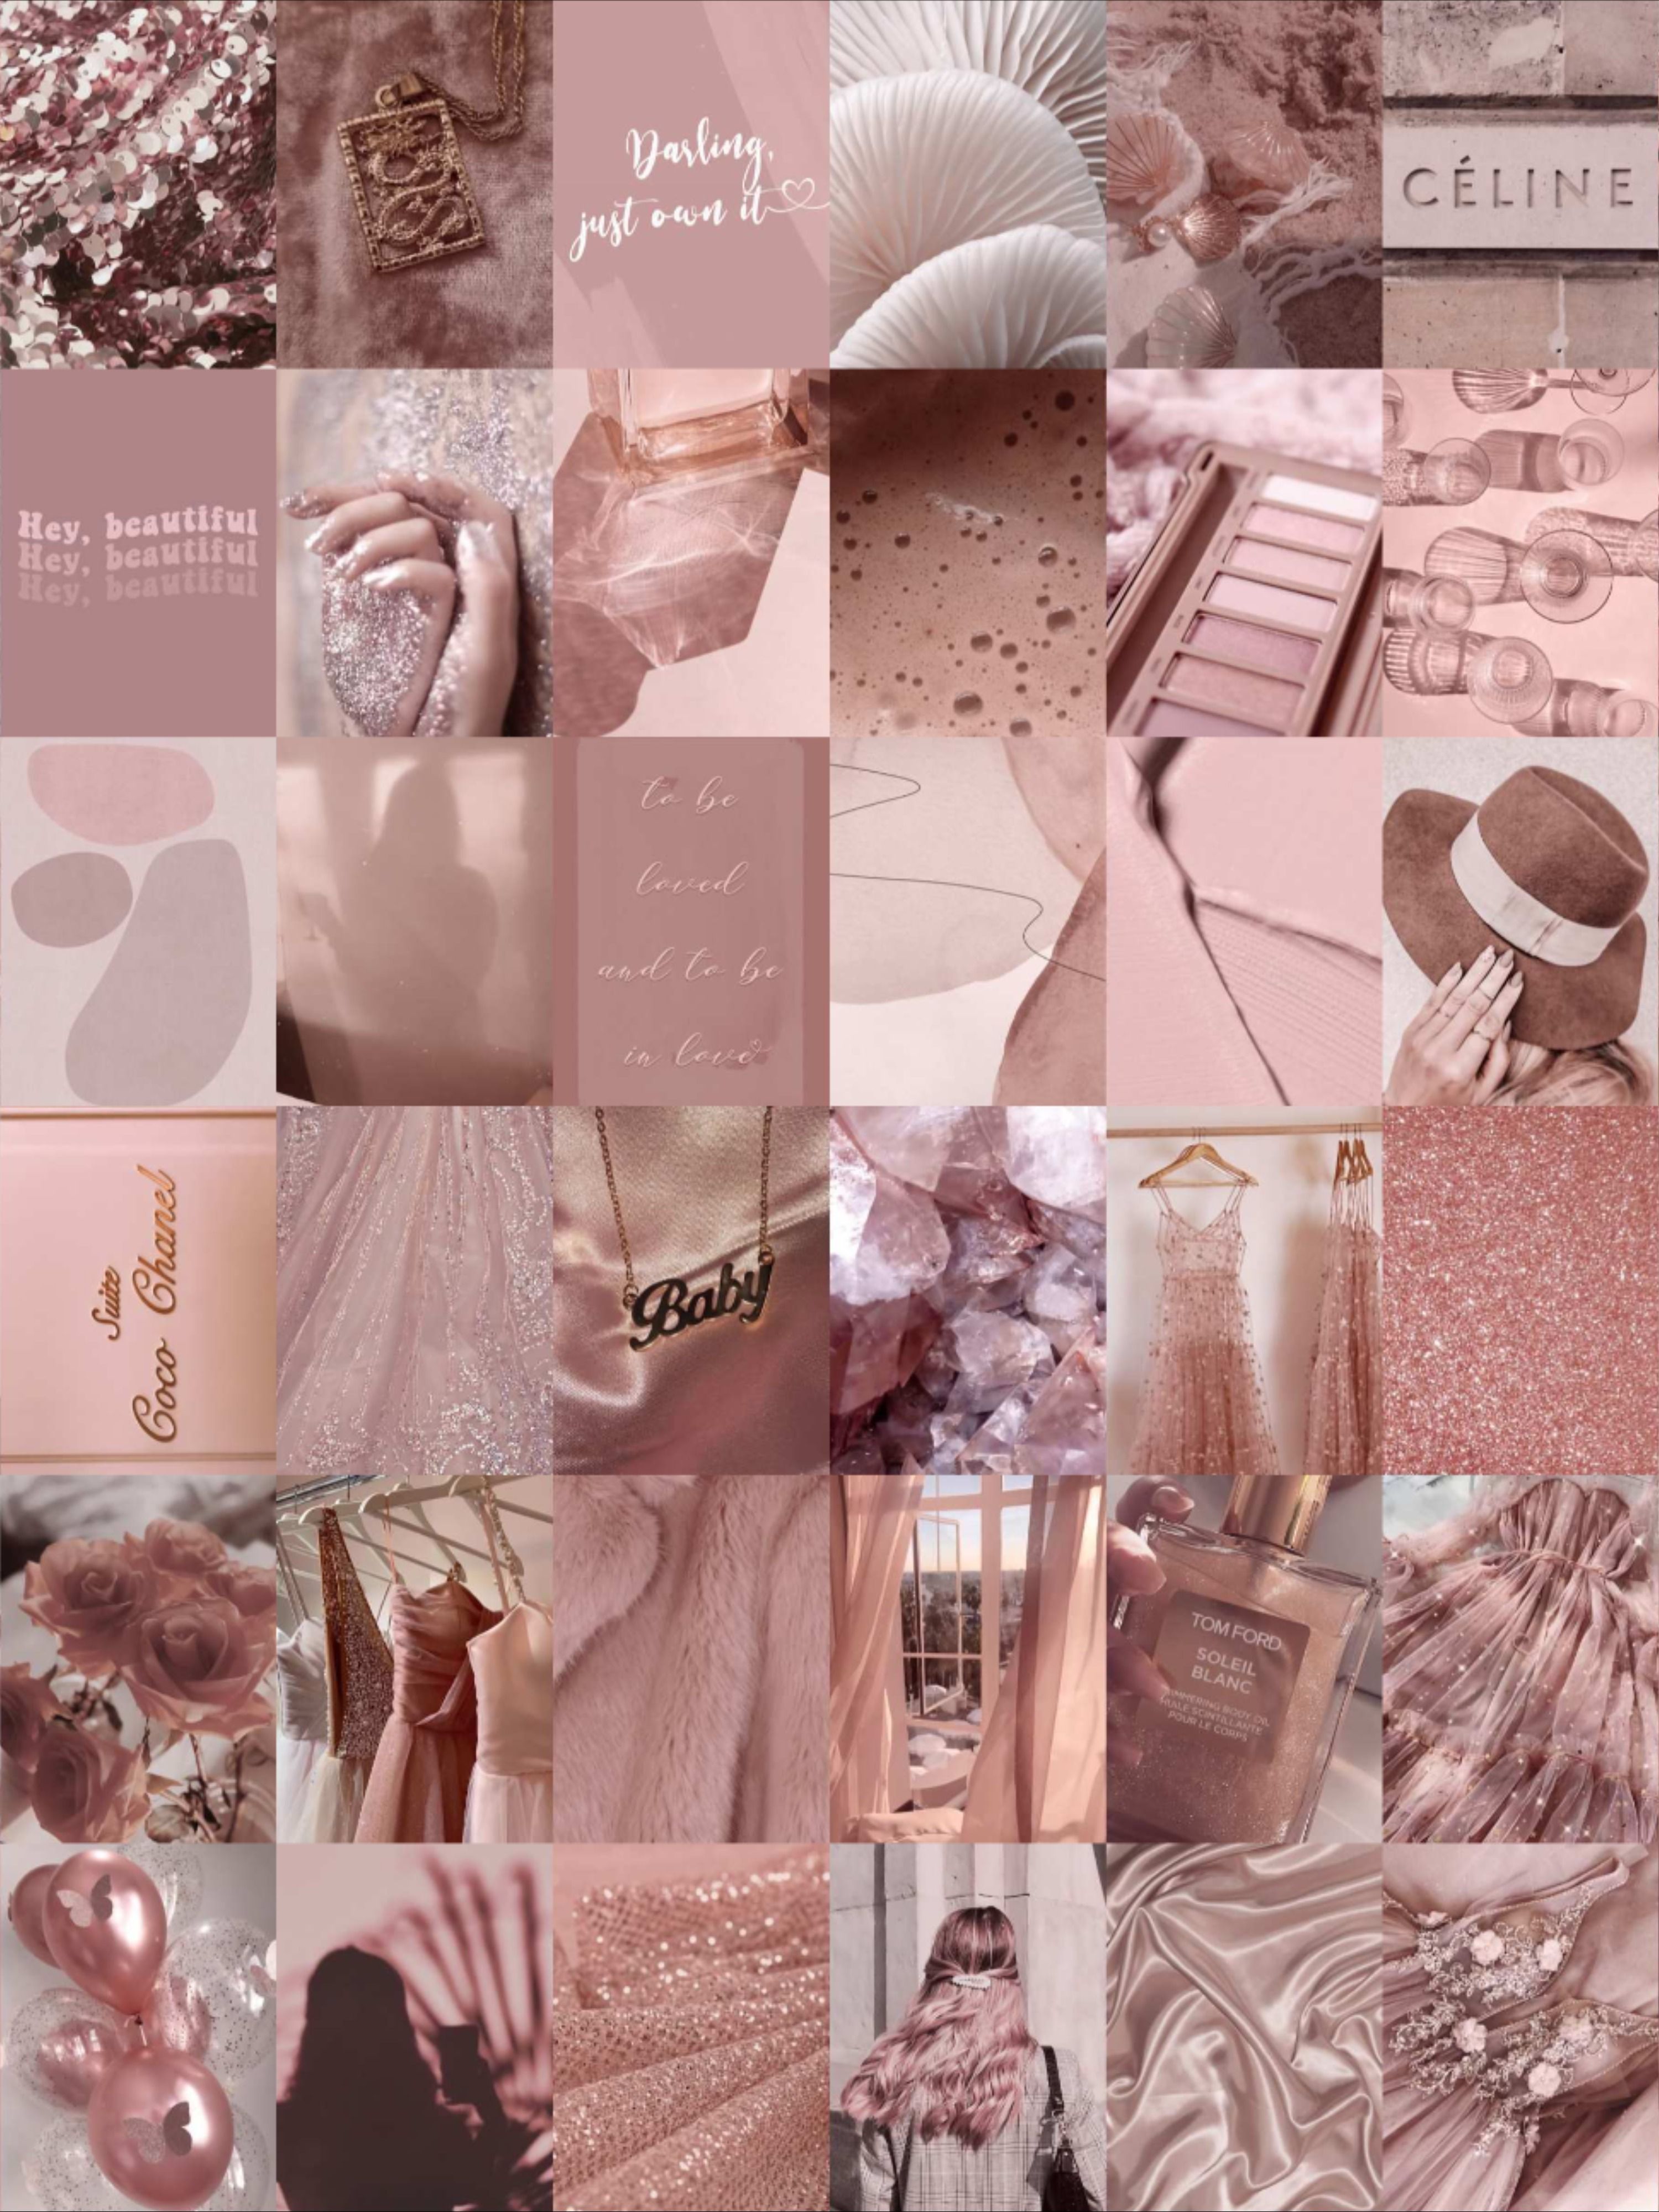 Rose Gold Wall Collage Kit Dusty Rose Aesthetic Soft Boujee. Etsy. Rose gold aesthetic, Gold aesthetic, Rose gold wallpaper